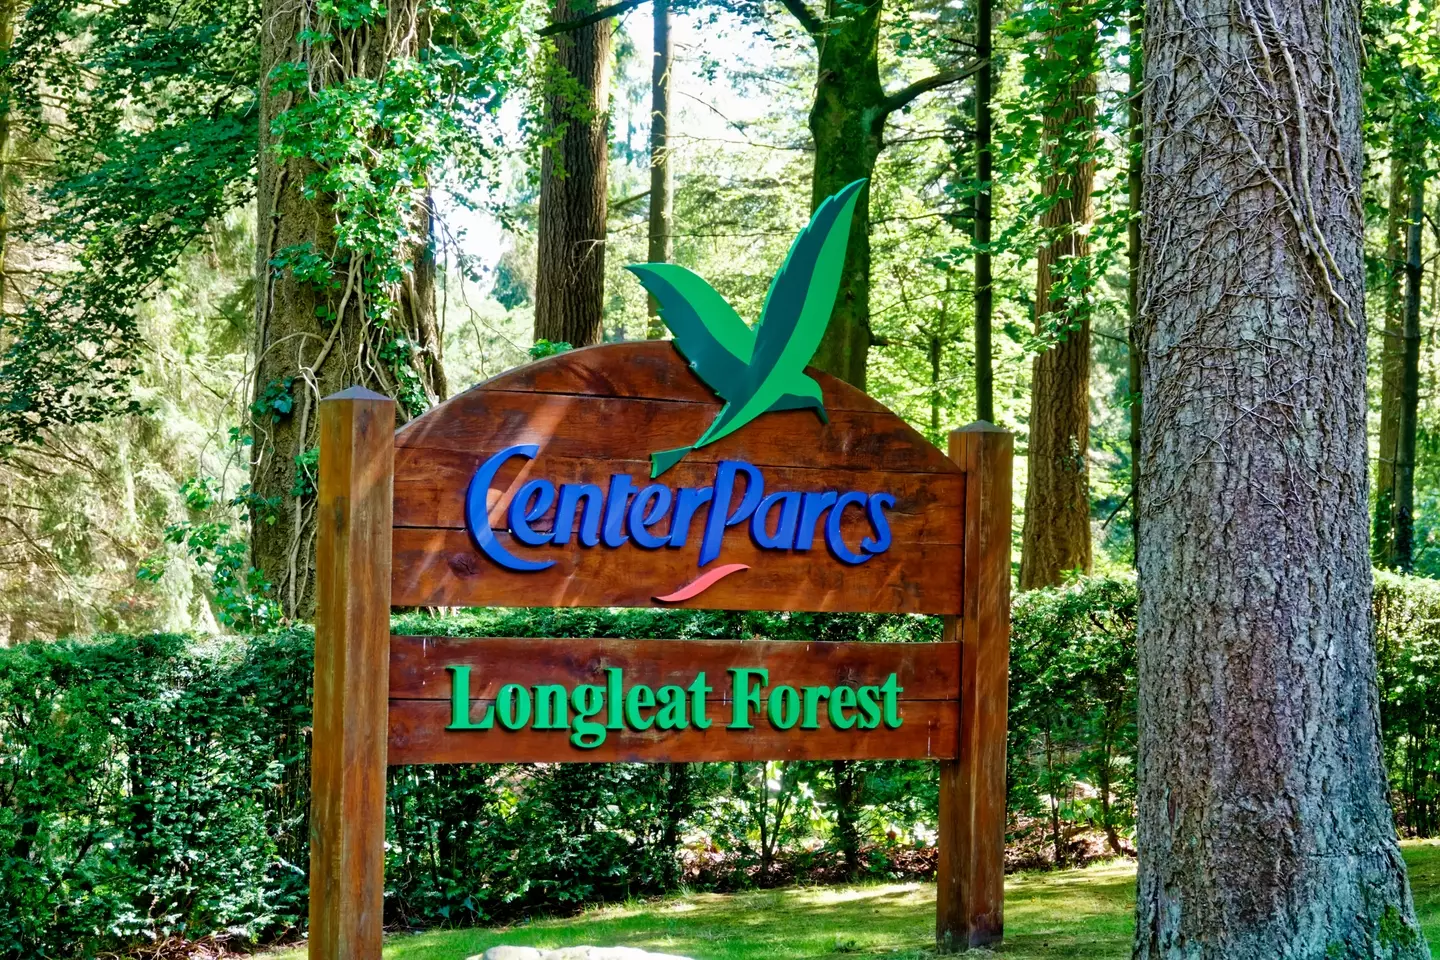 The incident took place at the Longleat Forest resort.